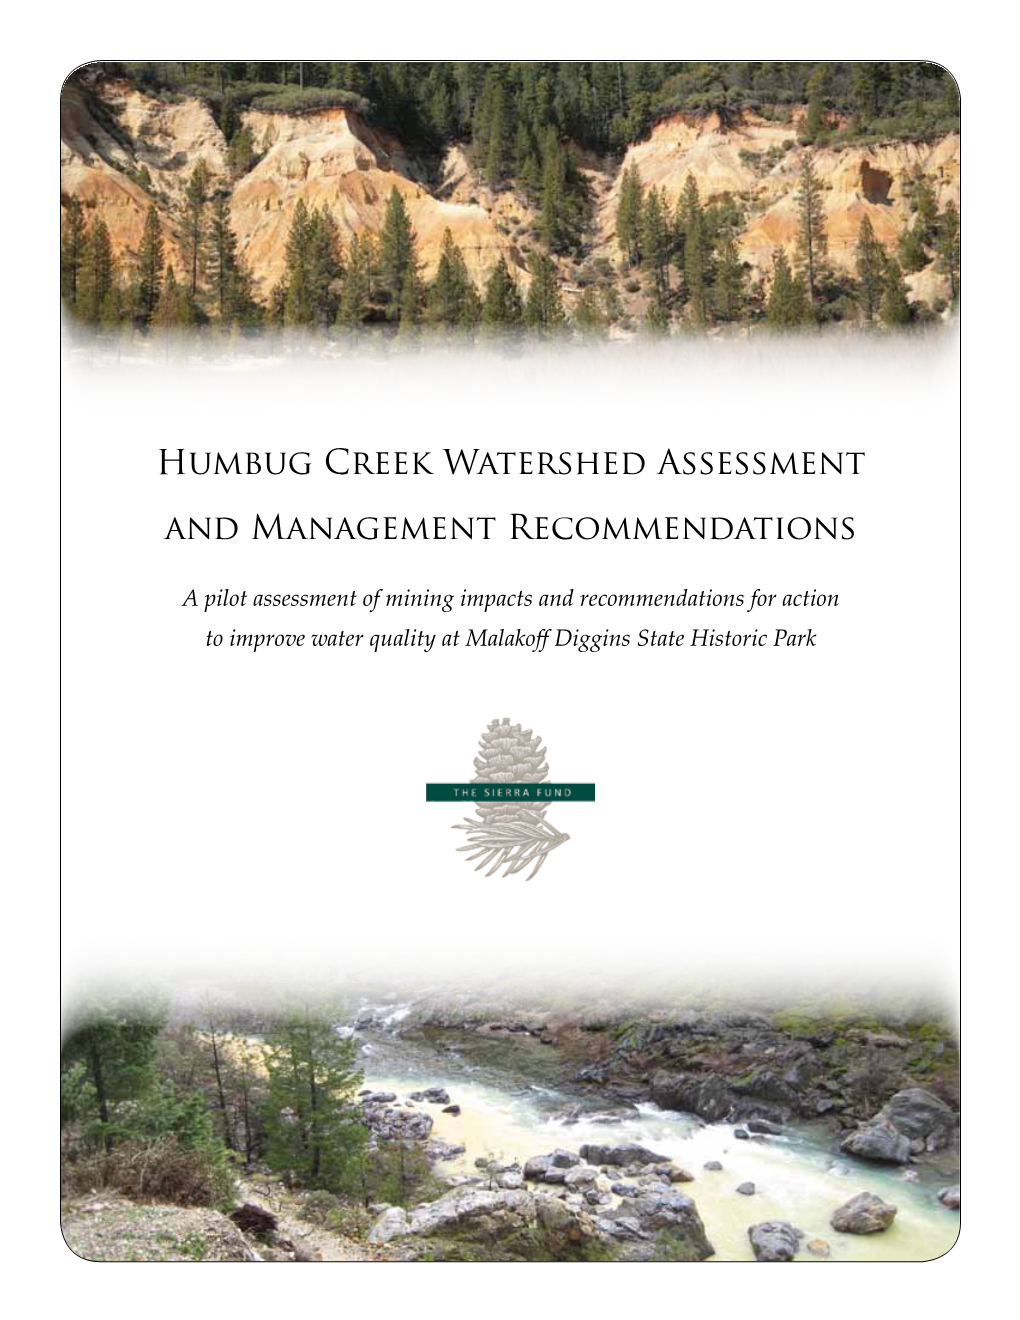 Humbug Creek Watershed Assessment and Management Recommendations